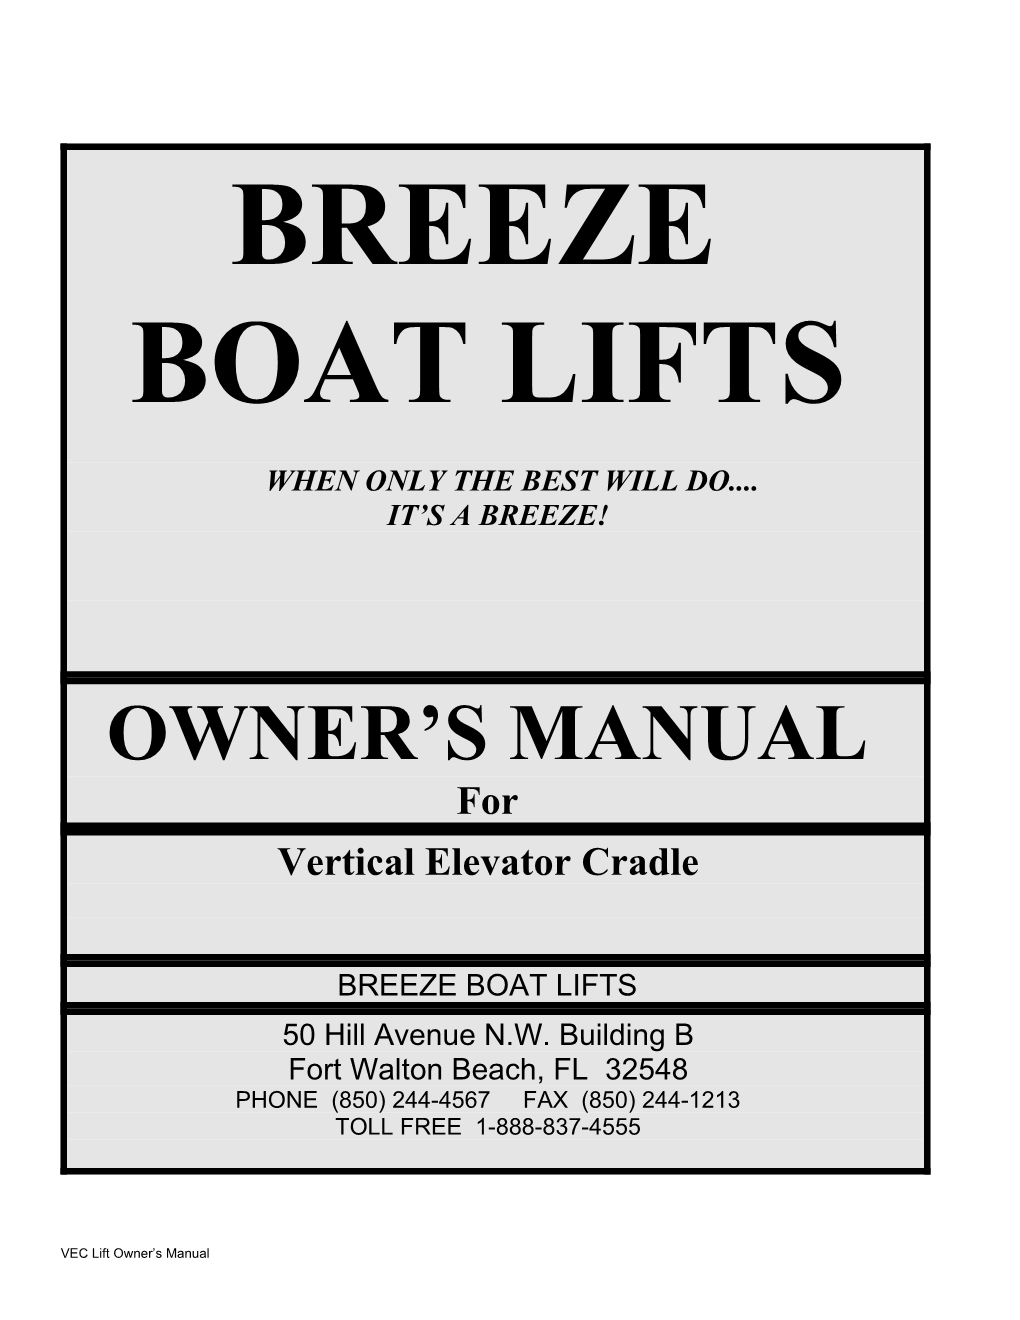 We Would Like to Take a Moment to Thank You for Purchasing a Breeze Boat Lift